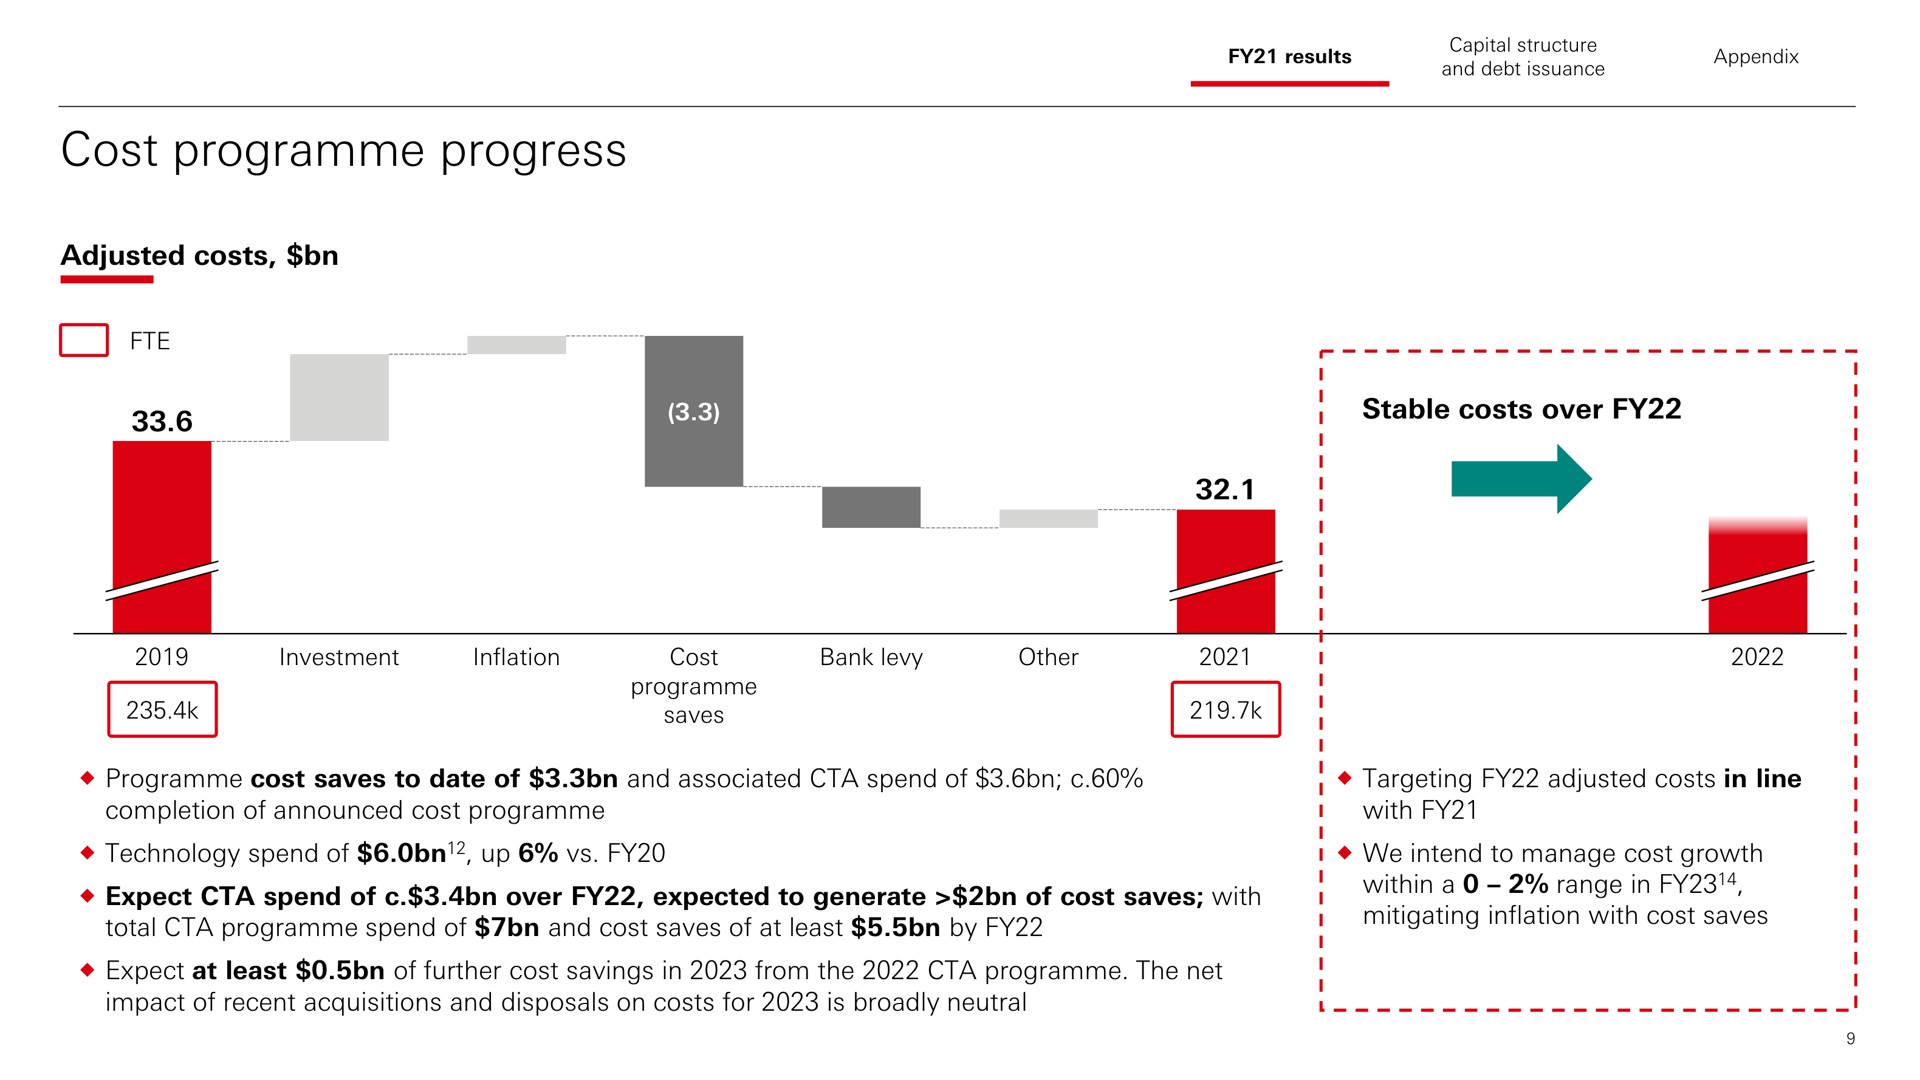 cost progress adjusted costs stable costs over results appendix sects vane | HSBC